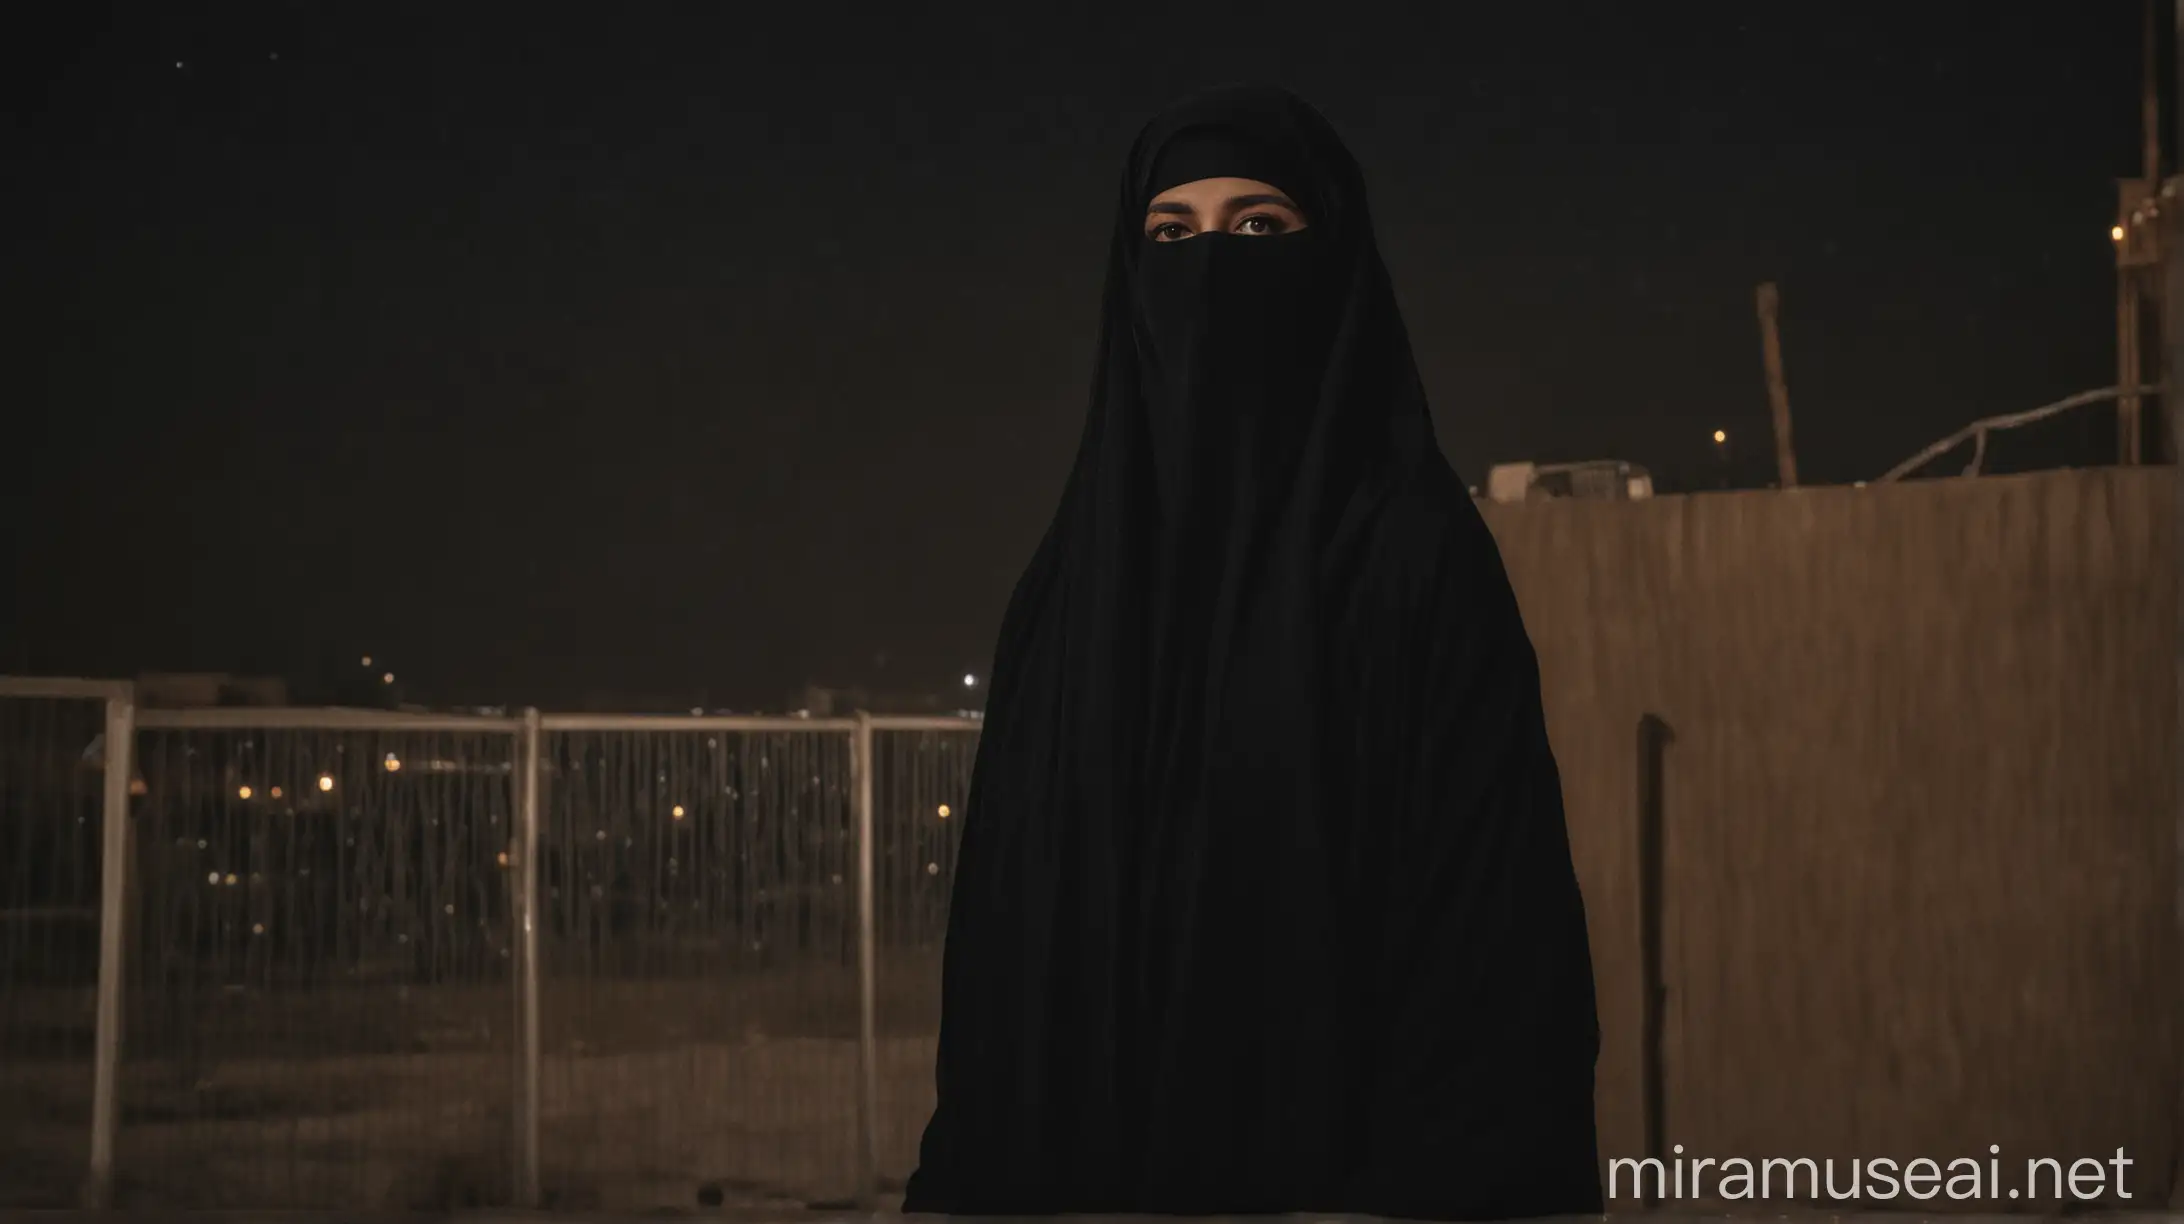 Woman in Burkha Standing Outdoors at Night